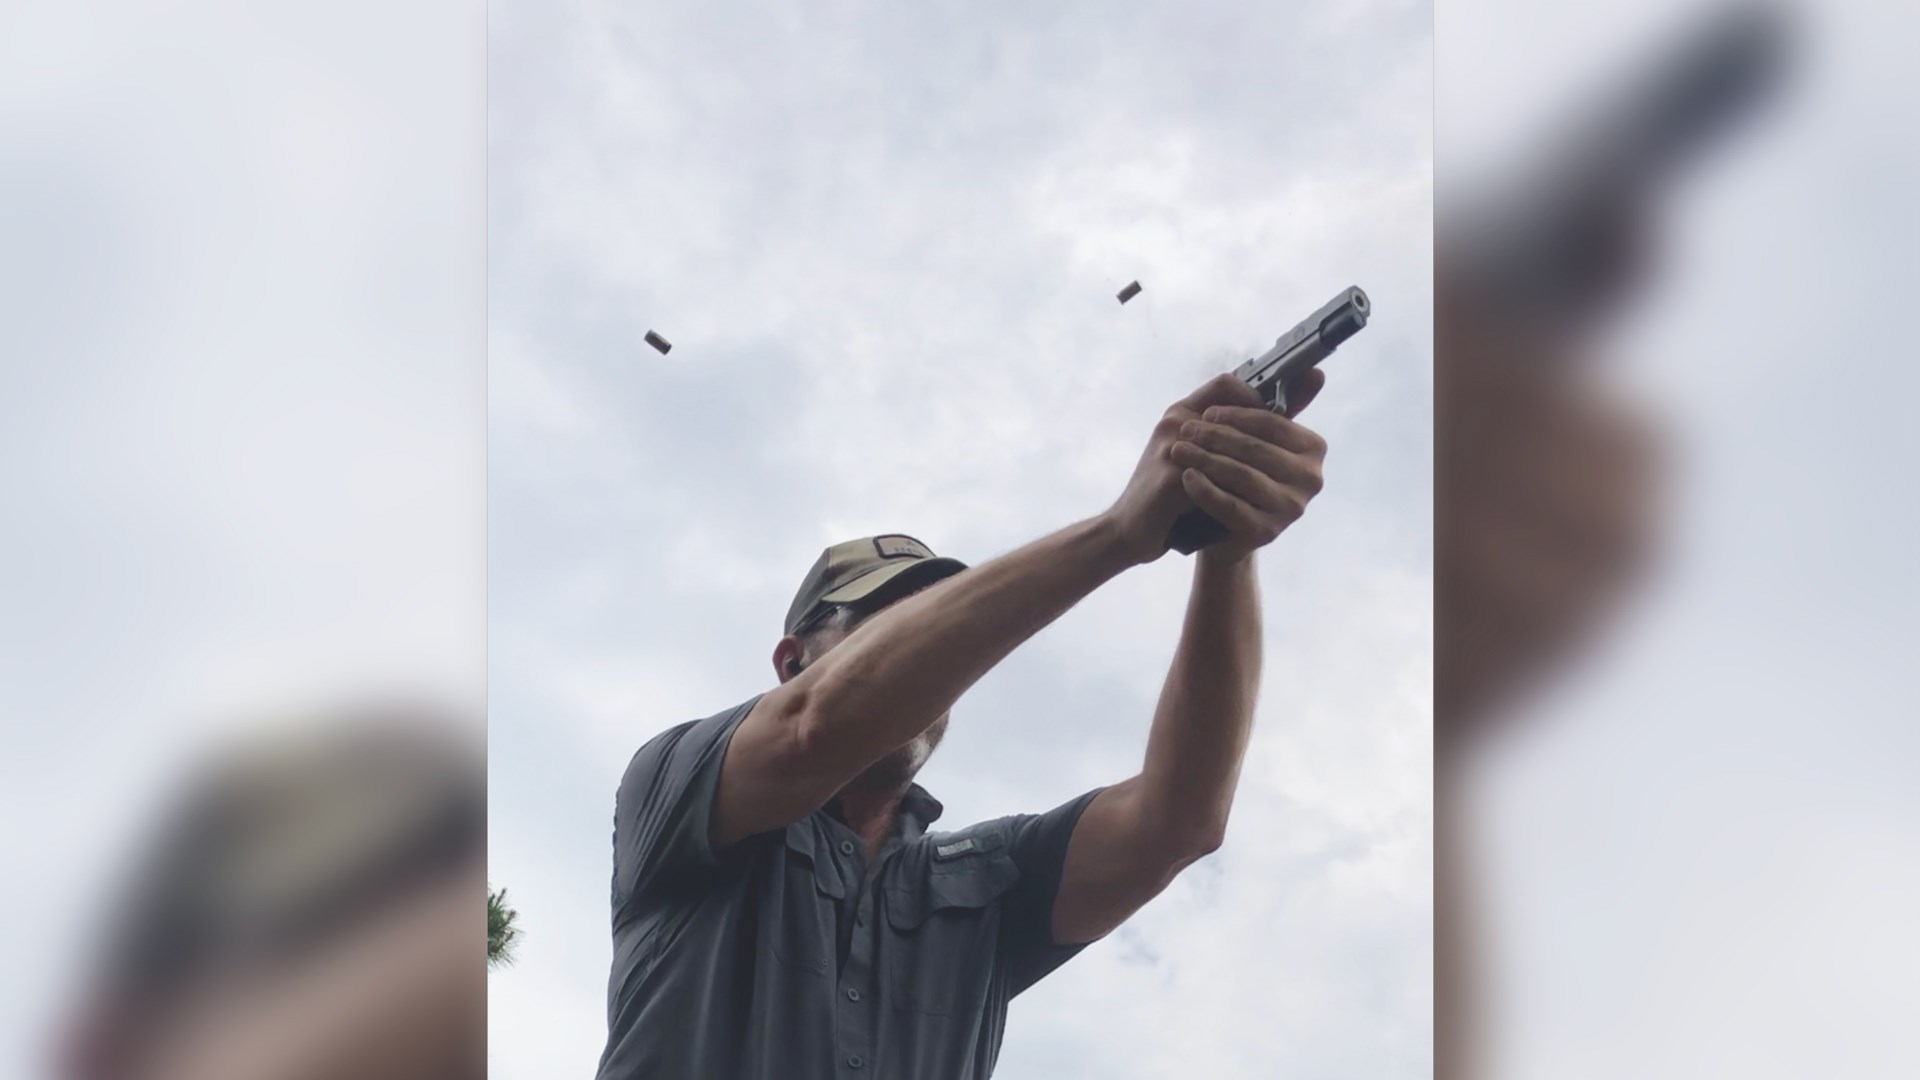 overlay image blur background copy of foreground skylight clouds spent brass in air coming out of 1911 man shooting ballcap with his face covered by arm camera point up from ground